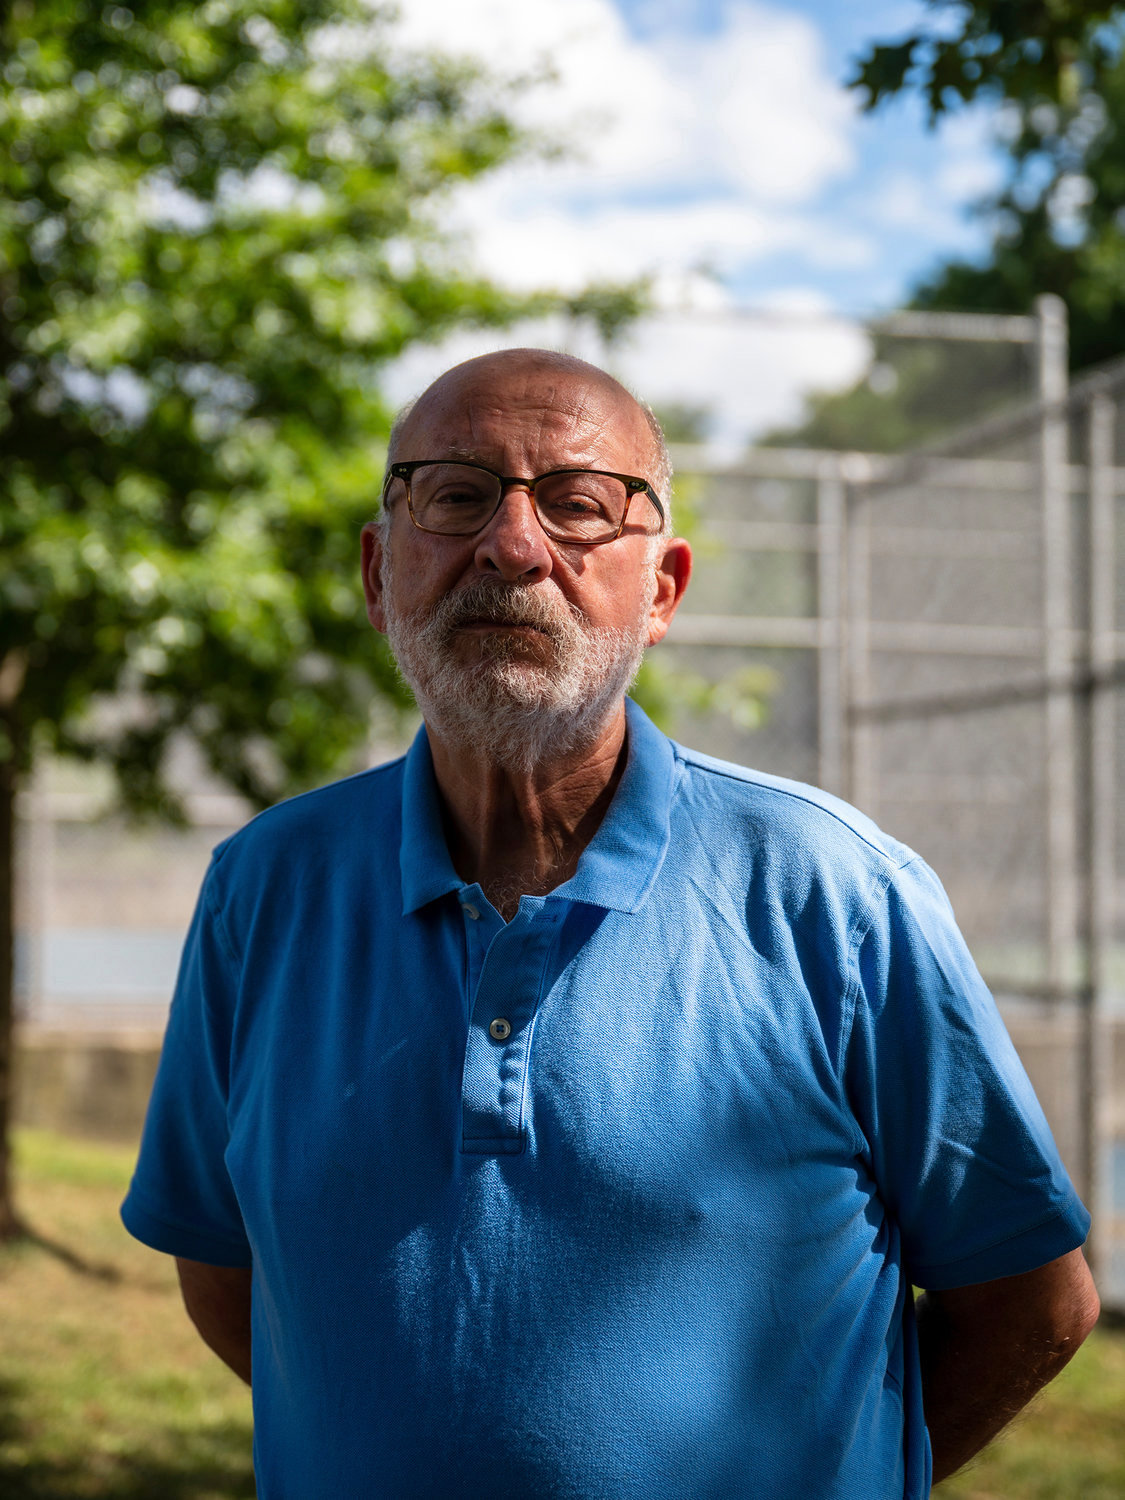 Alex Rosenblum grew up playing sports but needed to take it easy when he had a heart attack, after he discovered pickleball in Florida where he spends his winters. Since returning to Riverdale, he has fought and advocated for pickleball courts in the northwest Bronx.